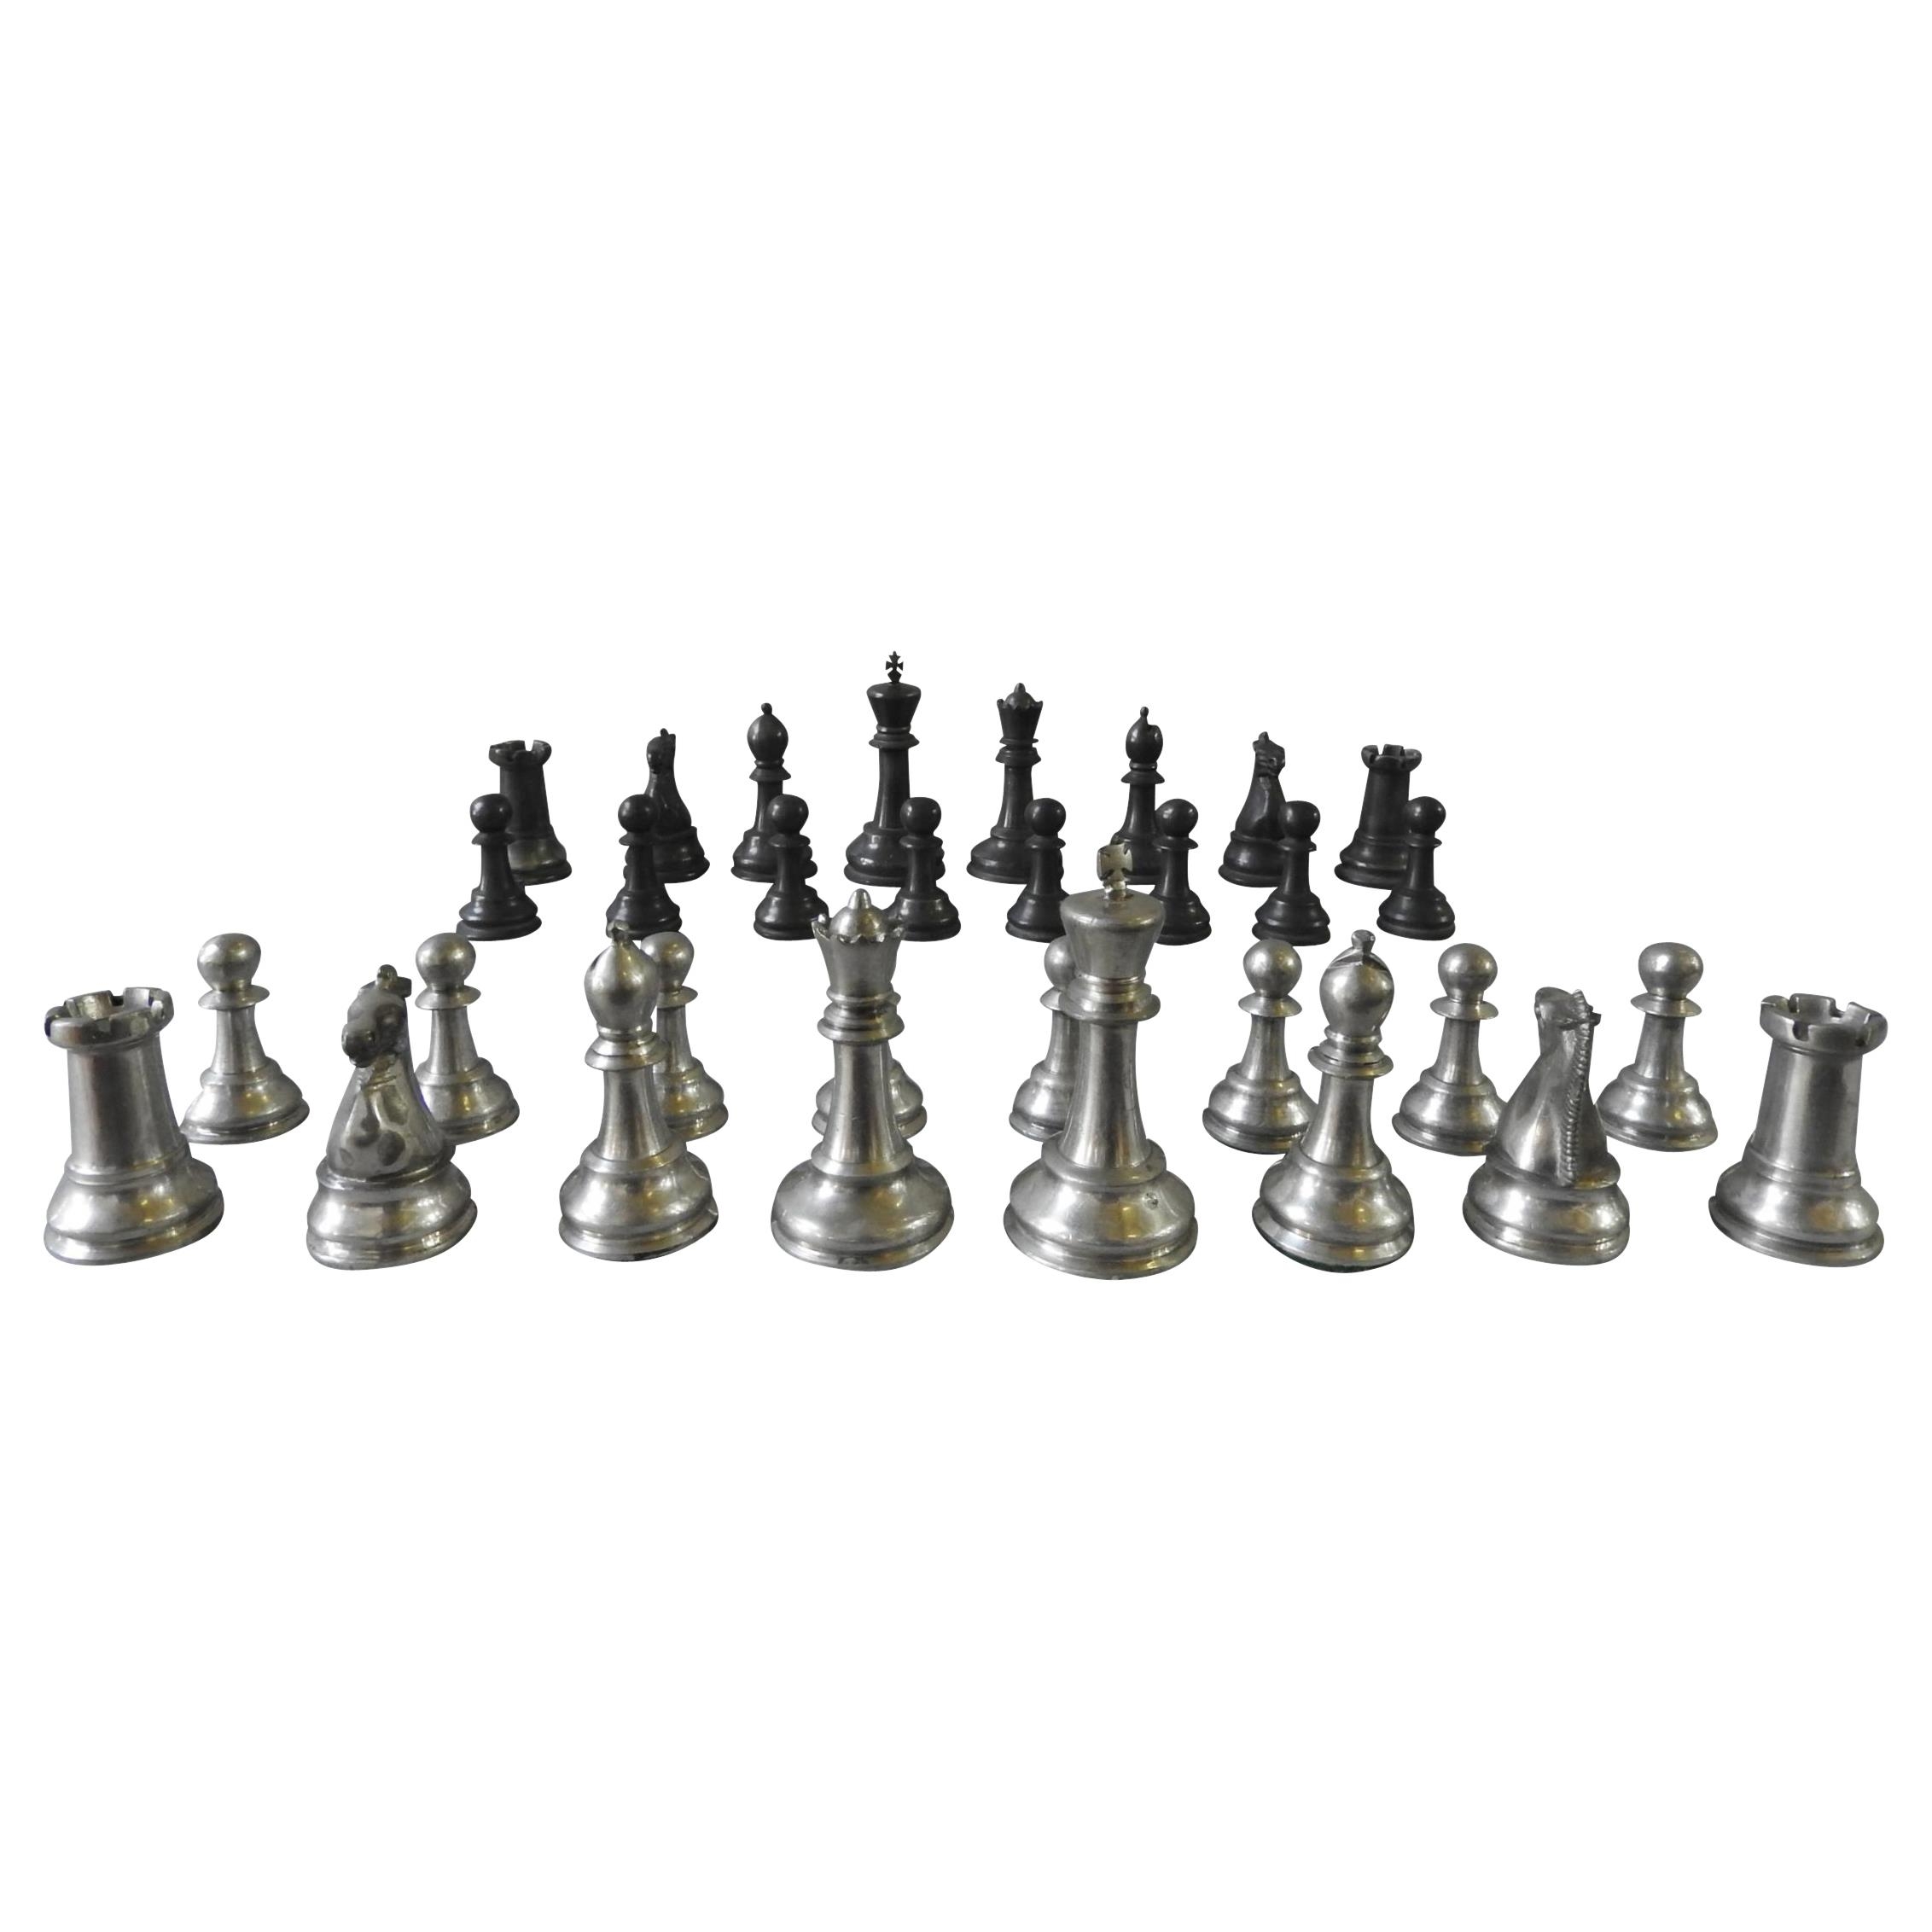 A COMPLETE SET OF 20th CENTURY PEWTER CHESS PIECES